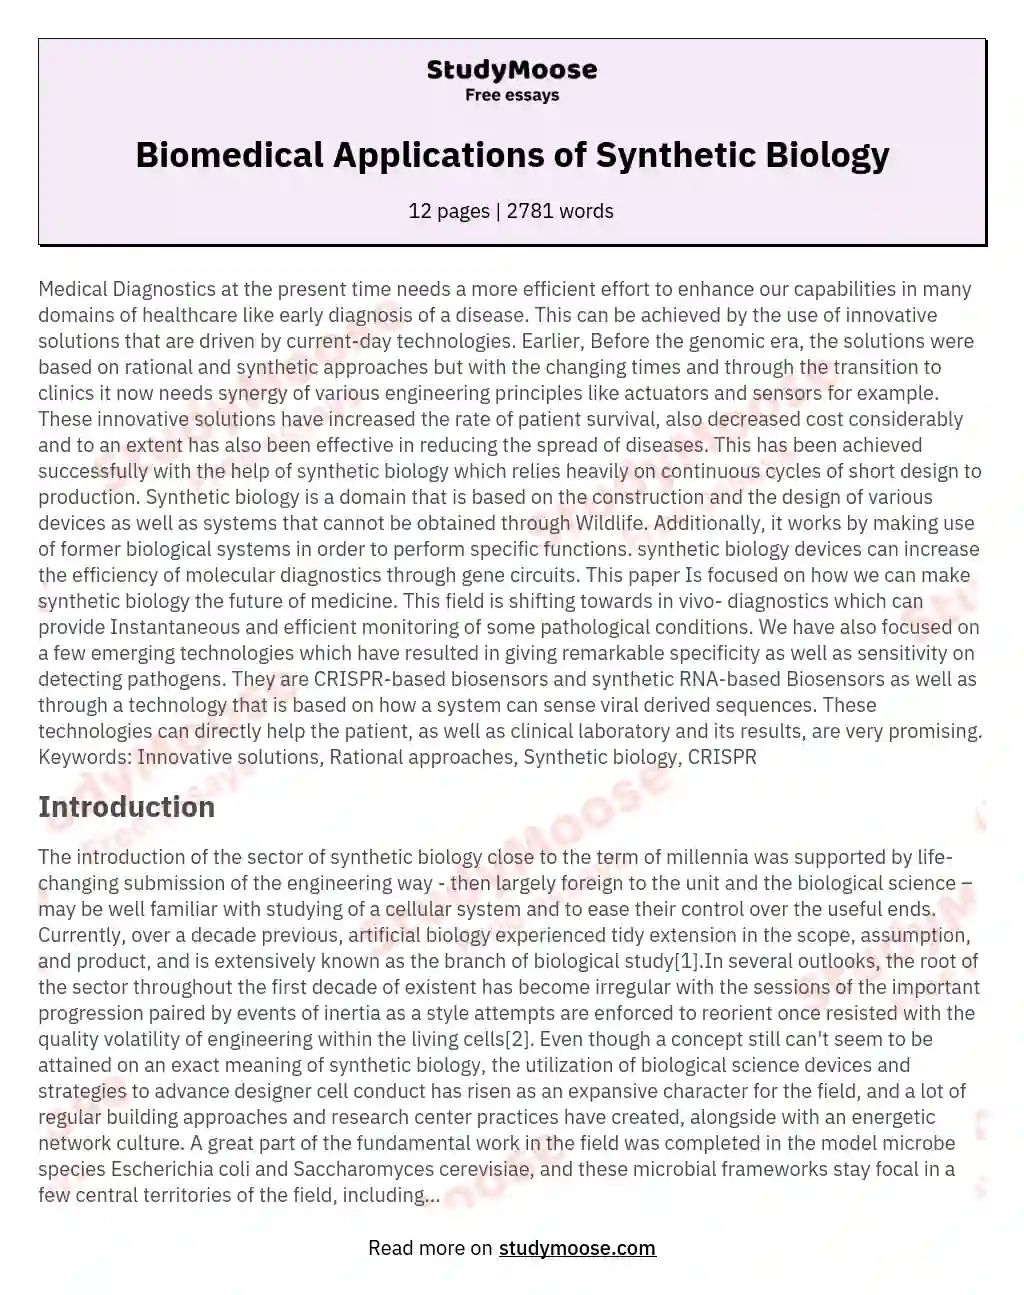 Biomedical Applications of Synthetic Biology essay